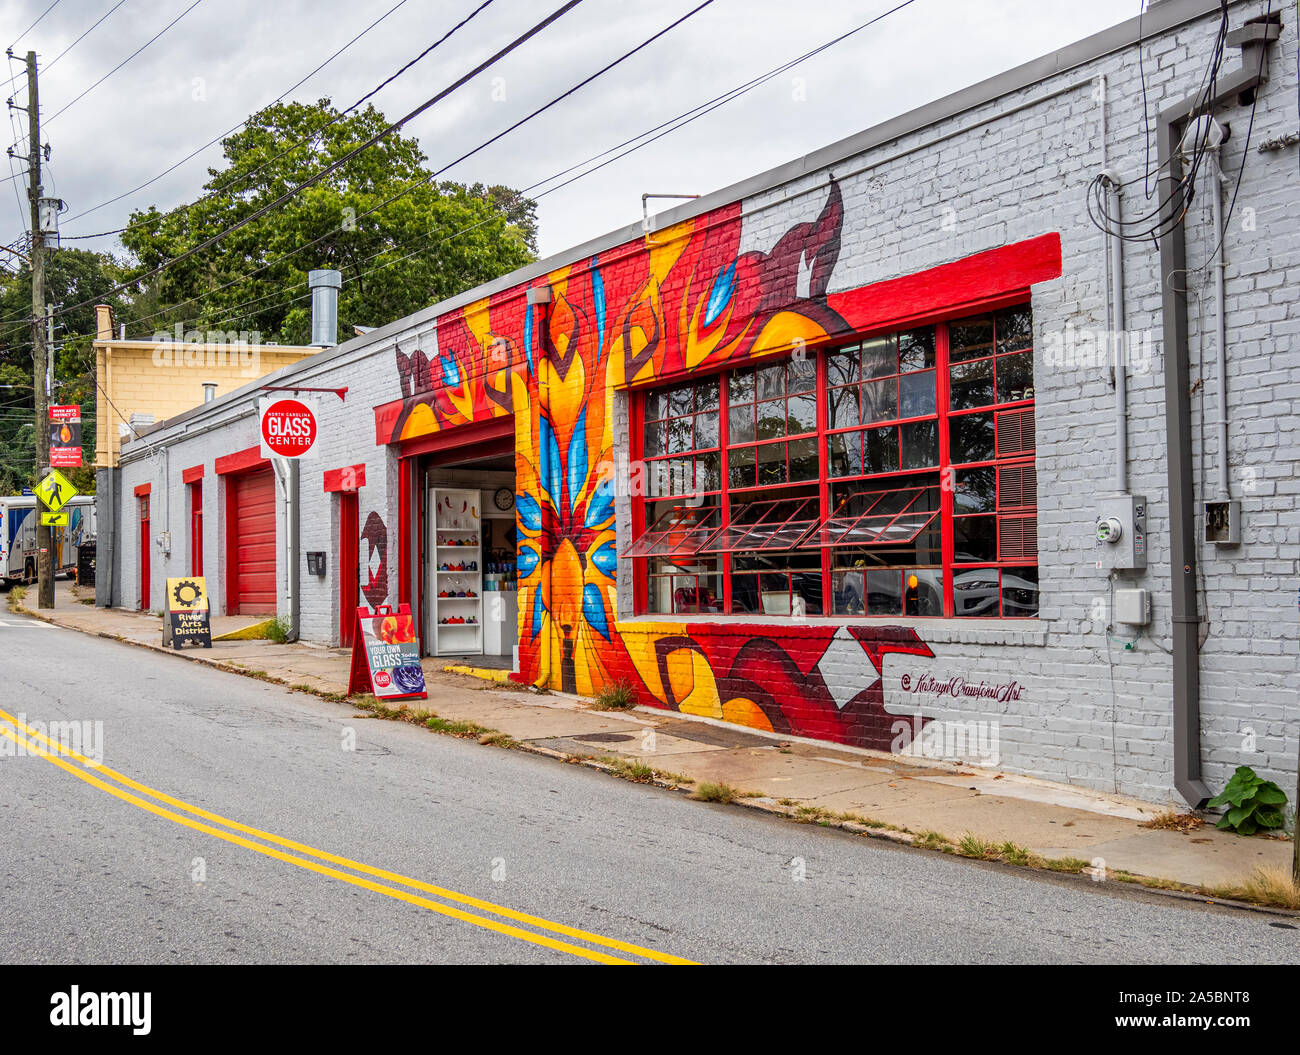 The Colorful River Arts District of Asheville North Carolina in the United States Stock Photo